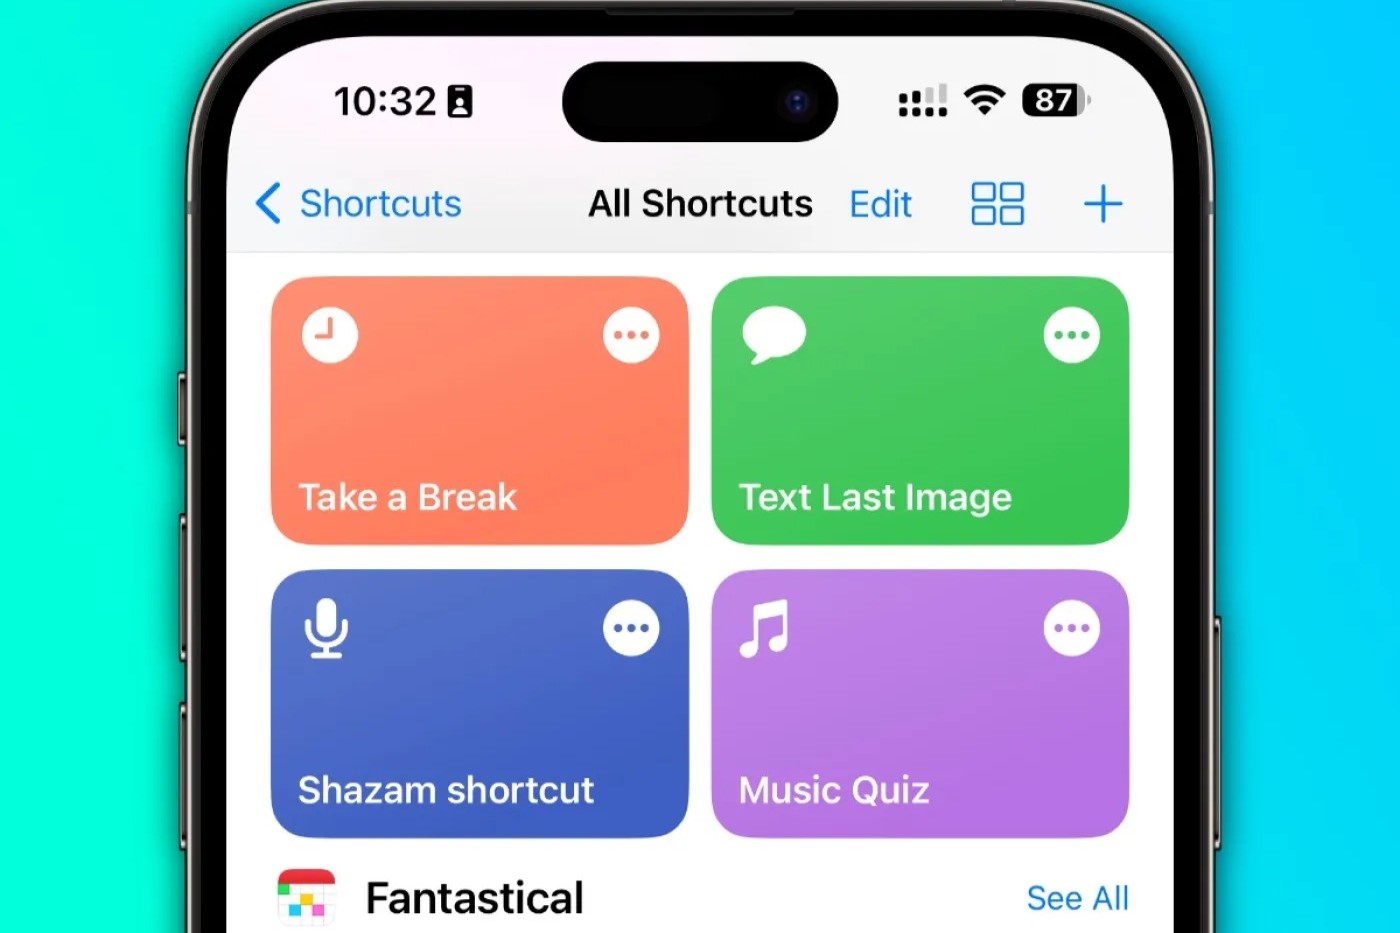 Creating Shortcuts On Xiaomi: Step-by-Step Guide